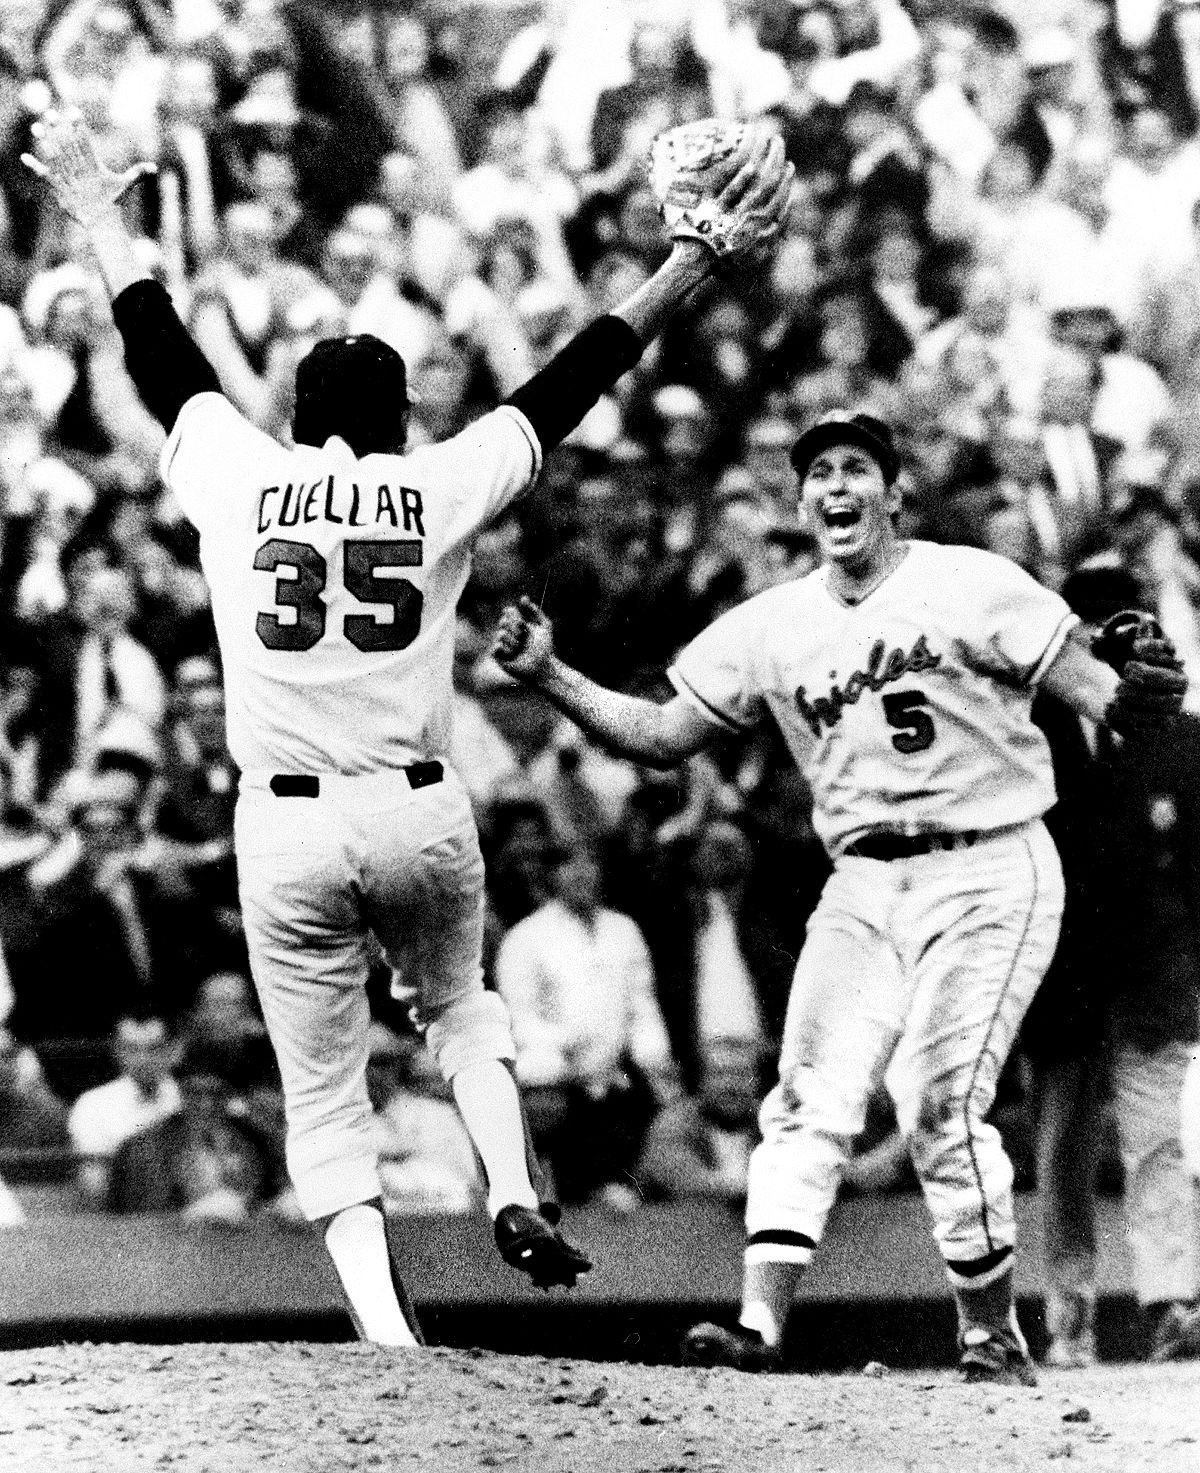 Orioles celebrate 50th anniversary of 1970 World Series title: 'Our one  goal was to win, period